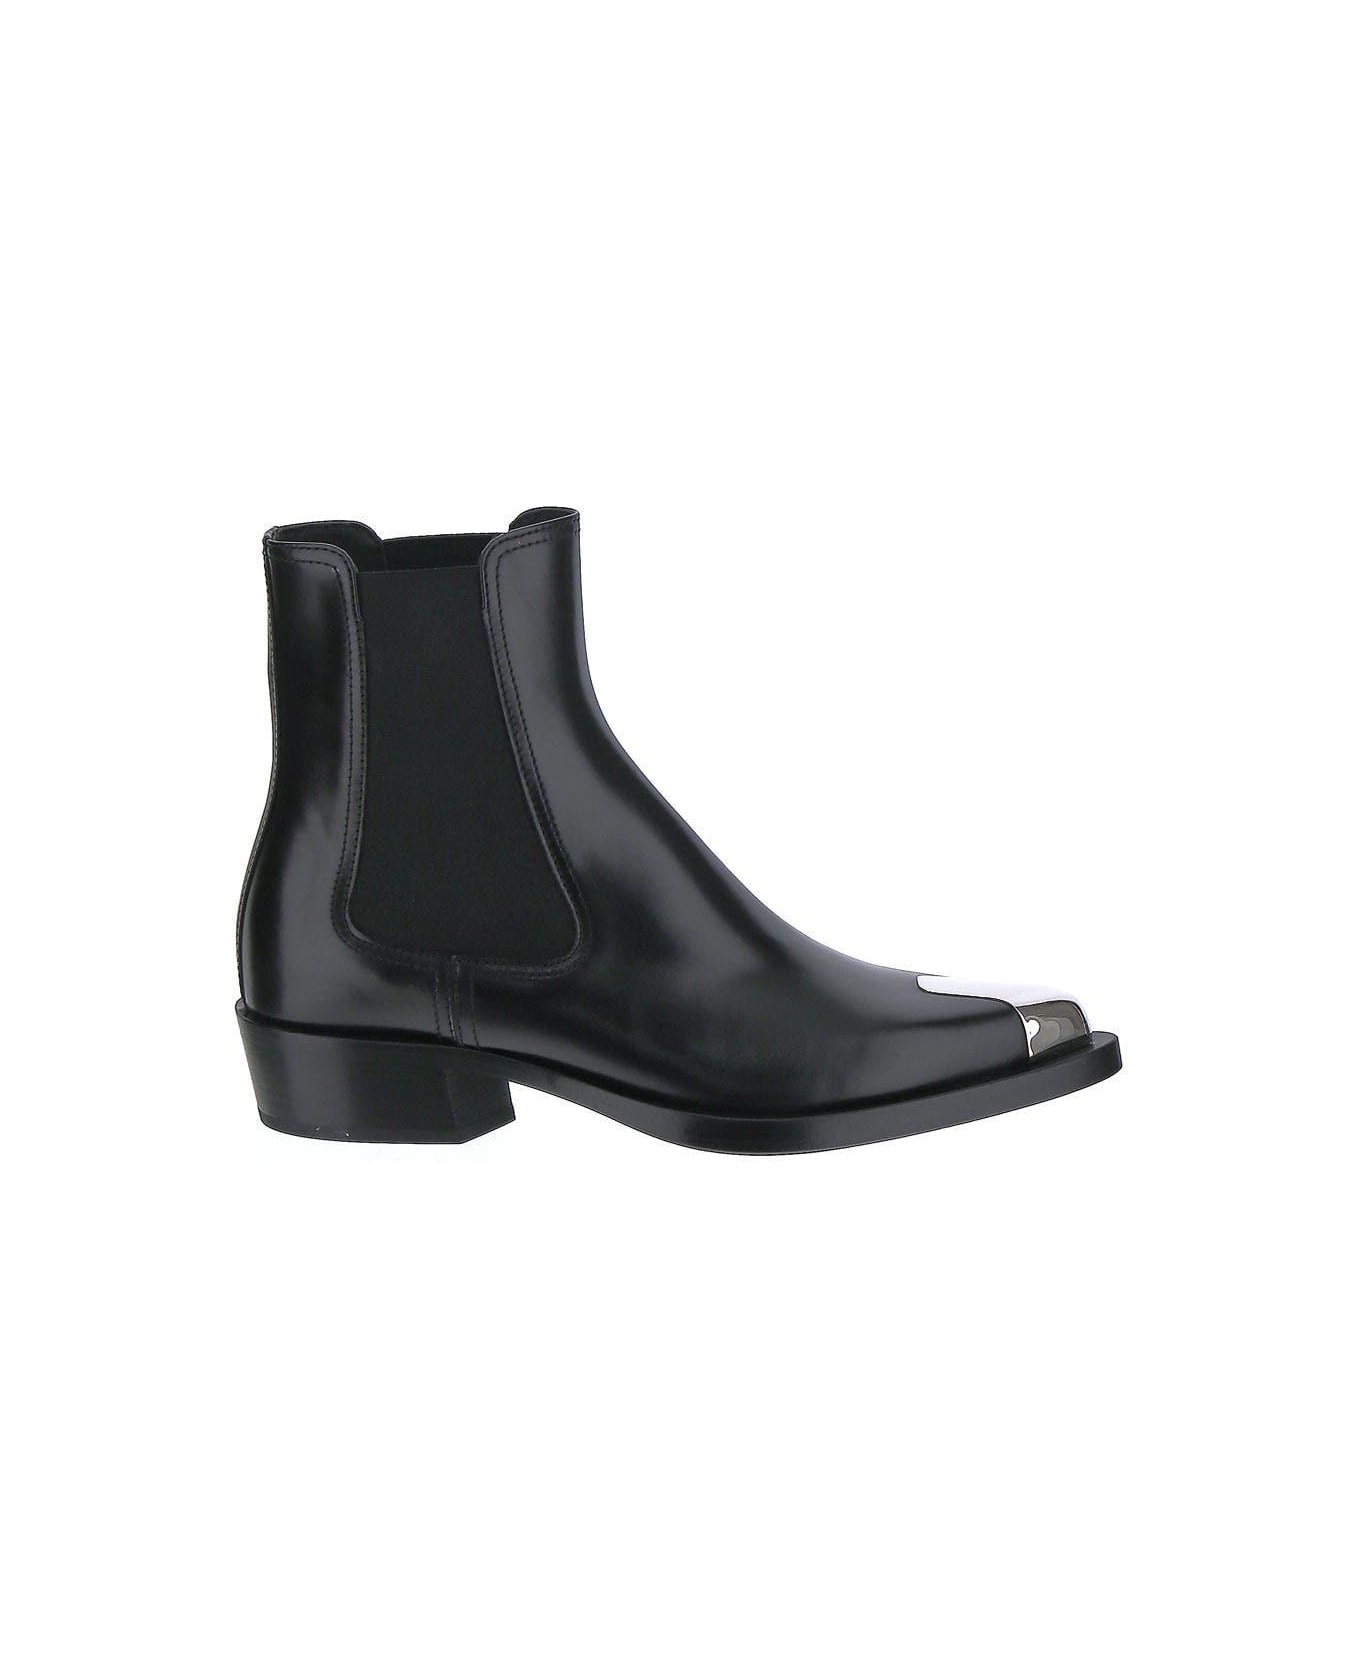 Alexander McQueen Leather Ankle Boots - Black ブーツ